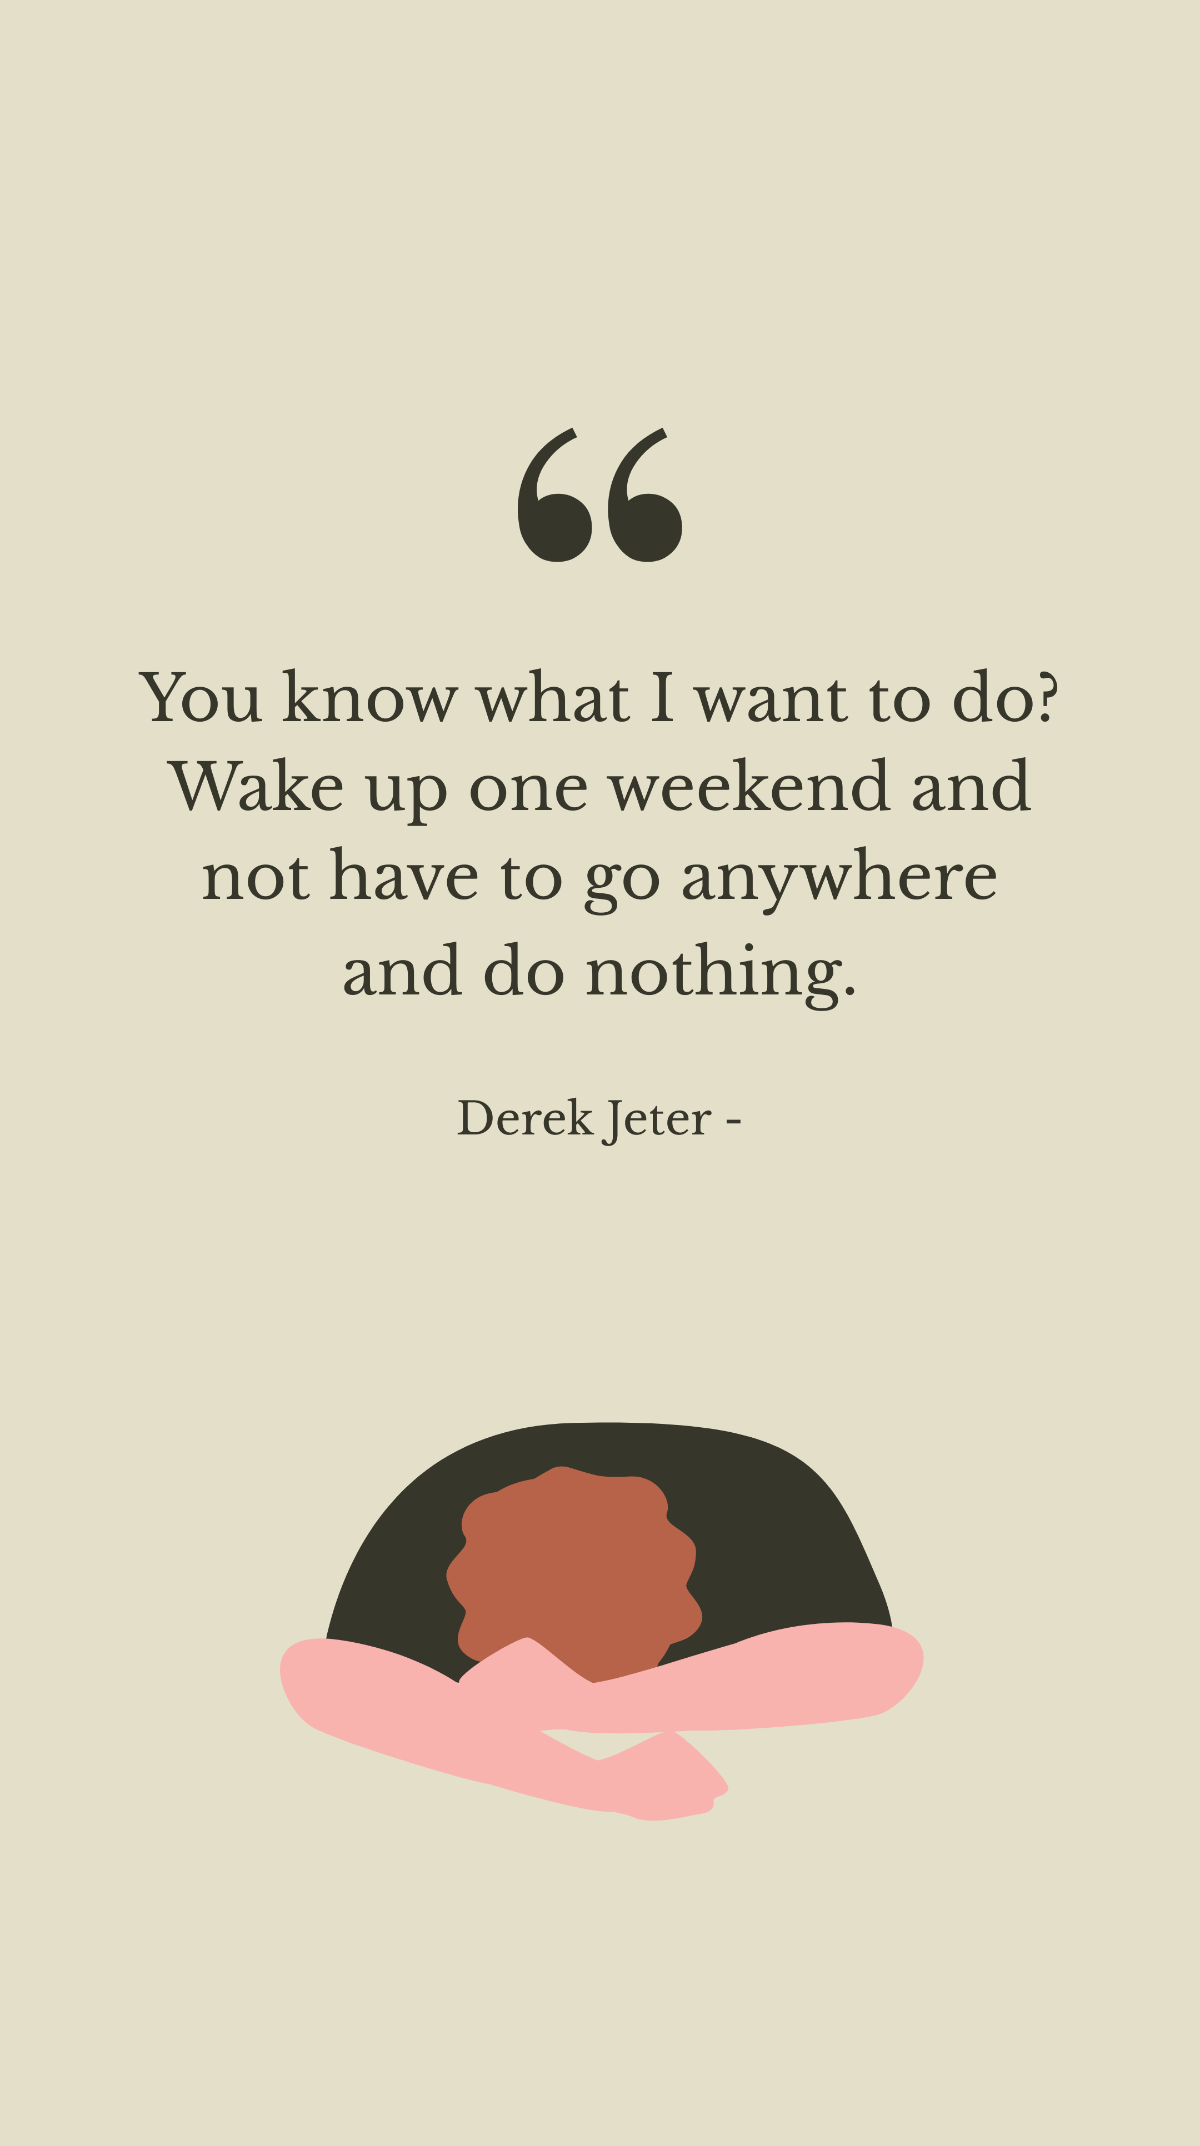 Derek Jeter - You know what I want to do? Wake up one weekend and not have to go anywhere and do nothing. Template